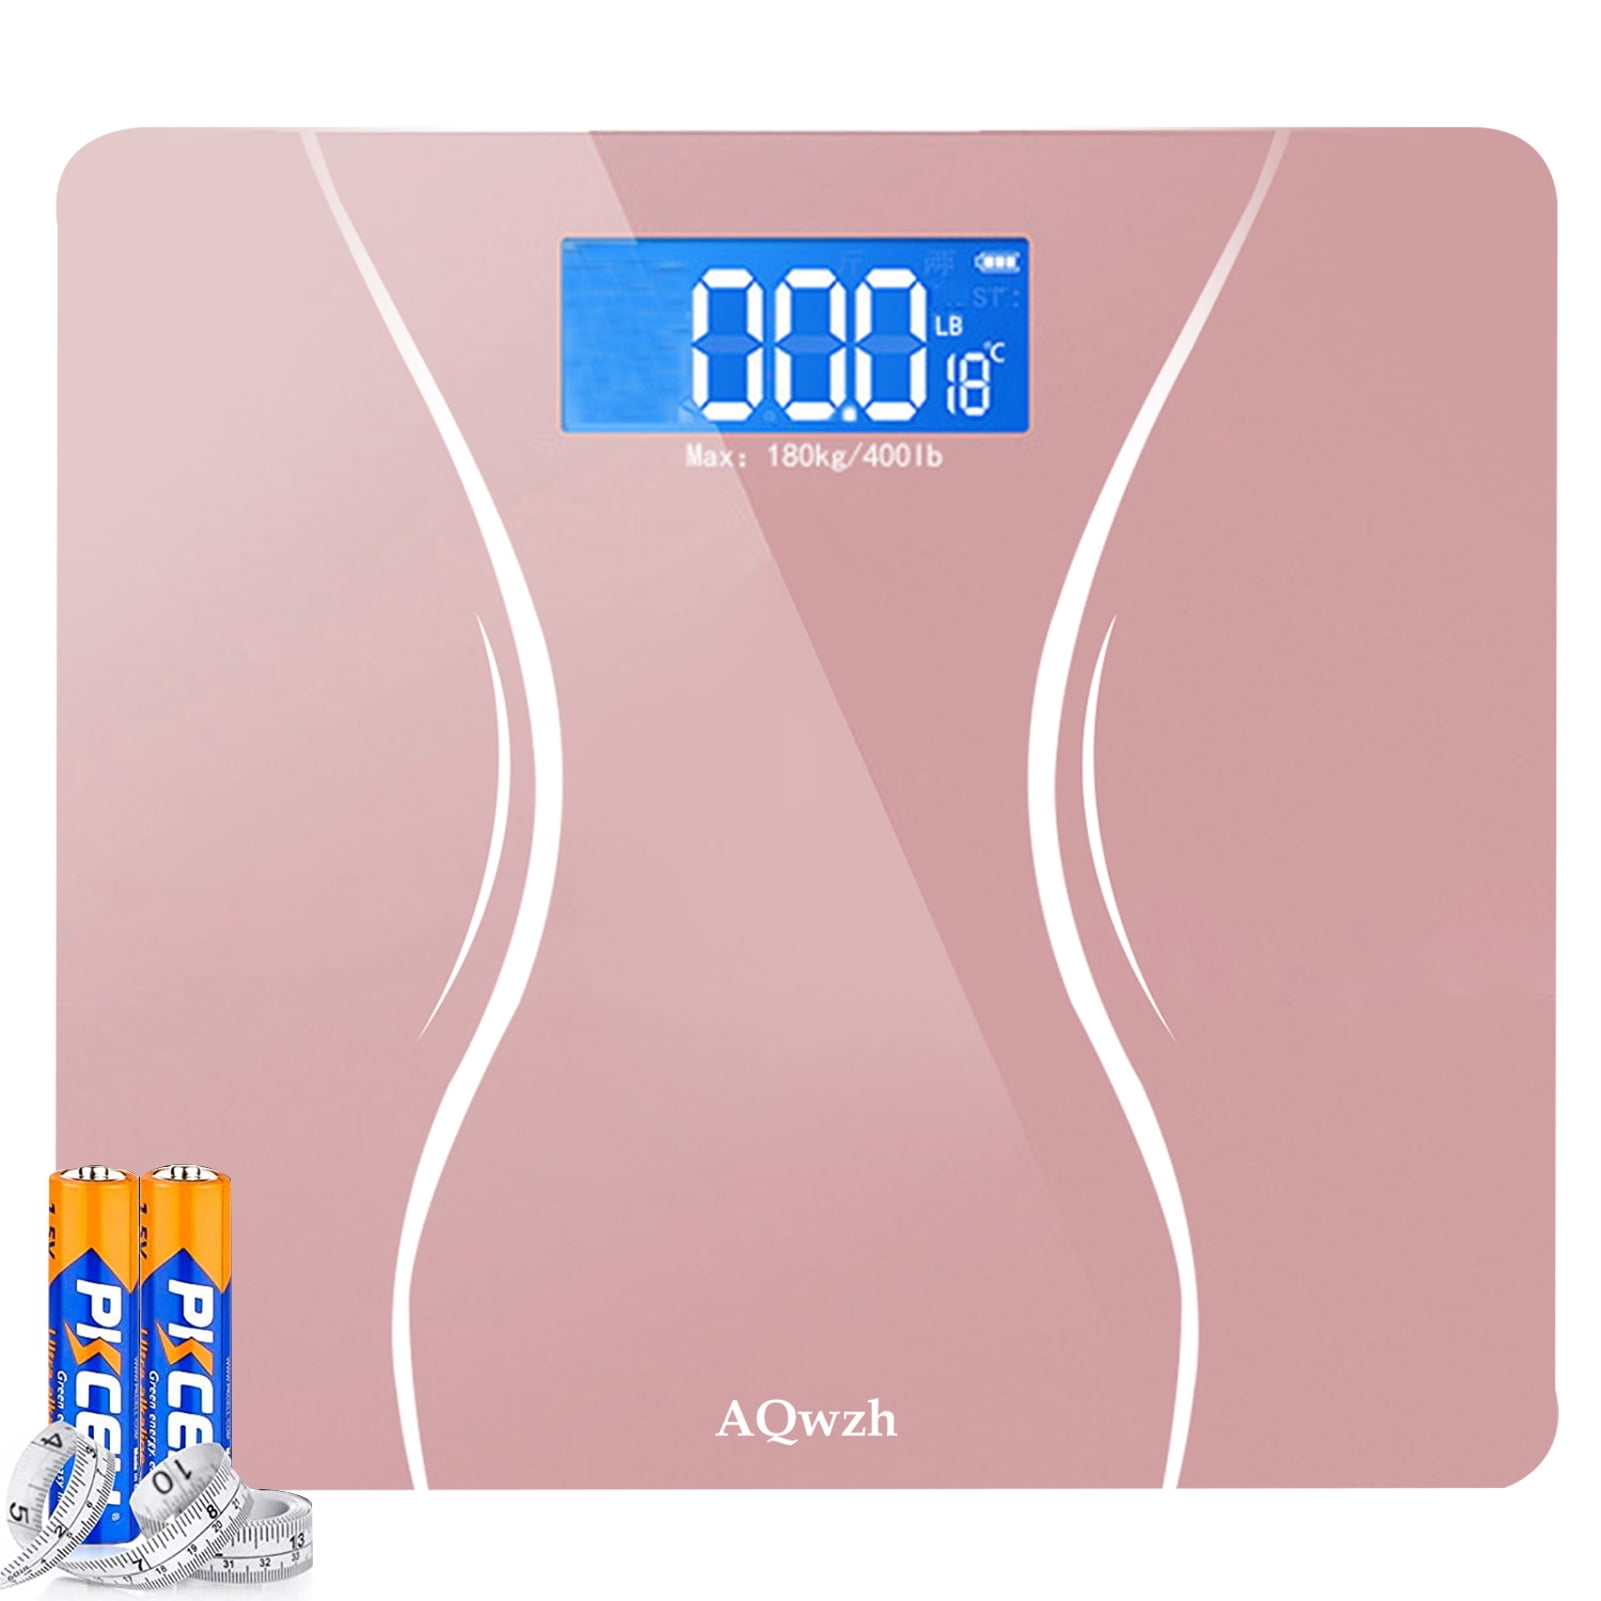 WEIRVI Digital Electronic Body Weight Scale with Room Temperature